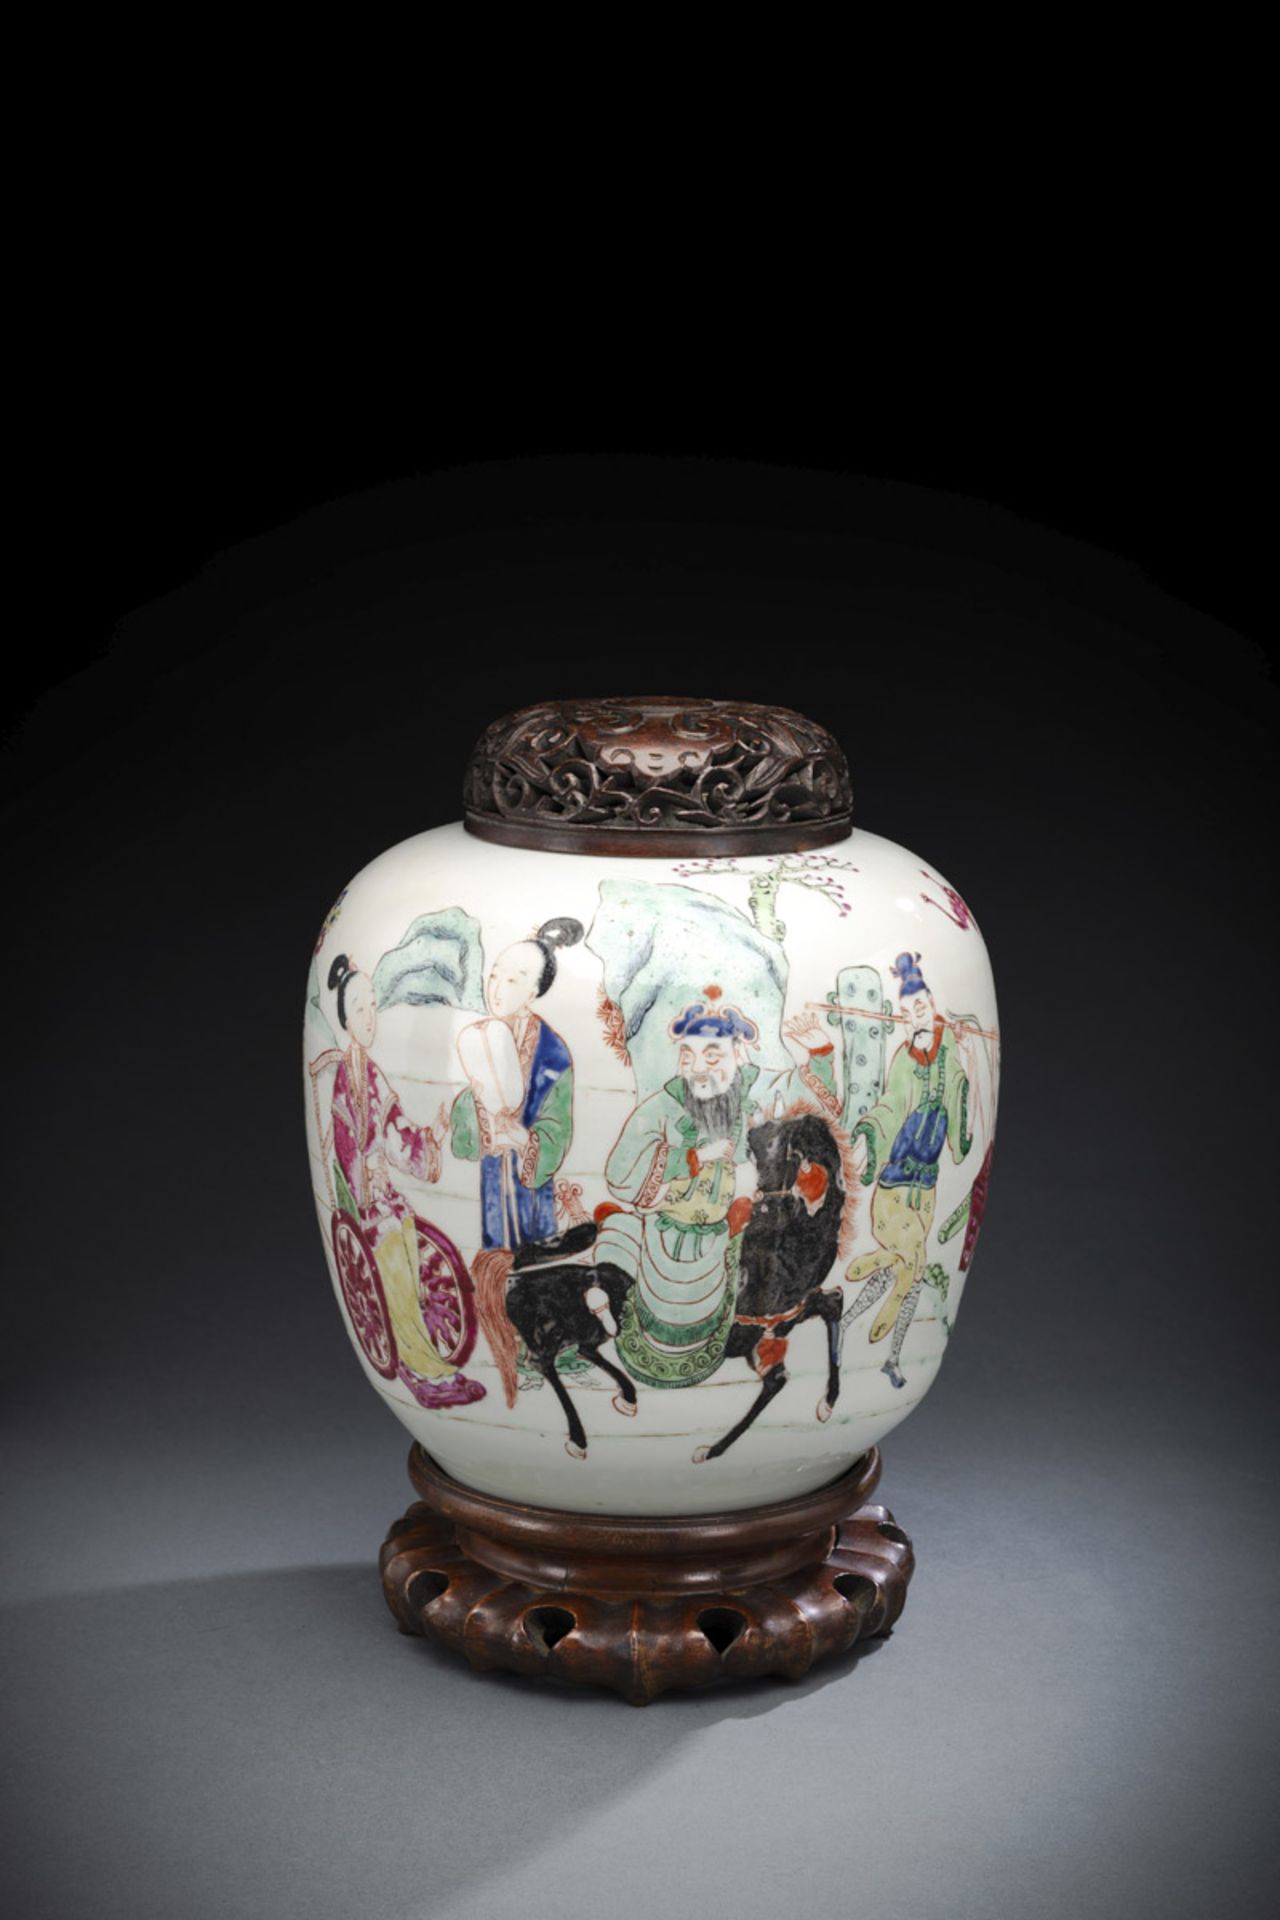 'FAMILLE ROSE' JAR WITH A COUPLE OF CIVIL SERVANTS TRAVELING IN A MOUNTAIN LANDSCAPE